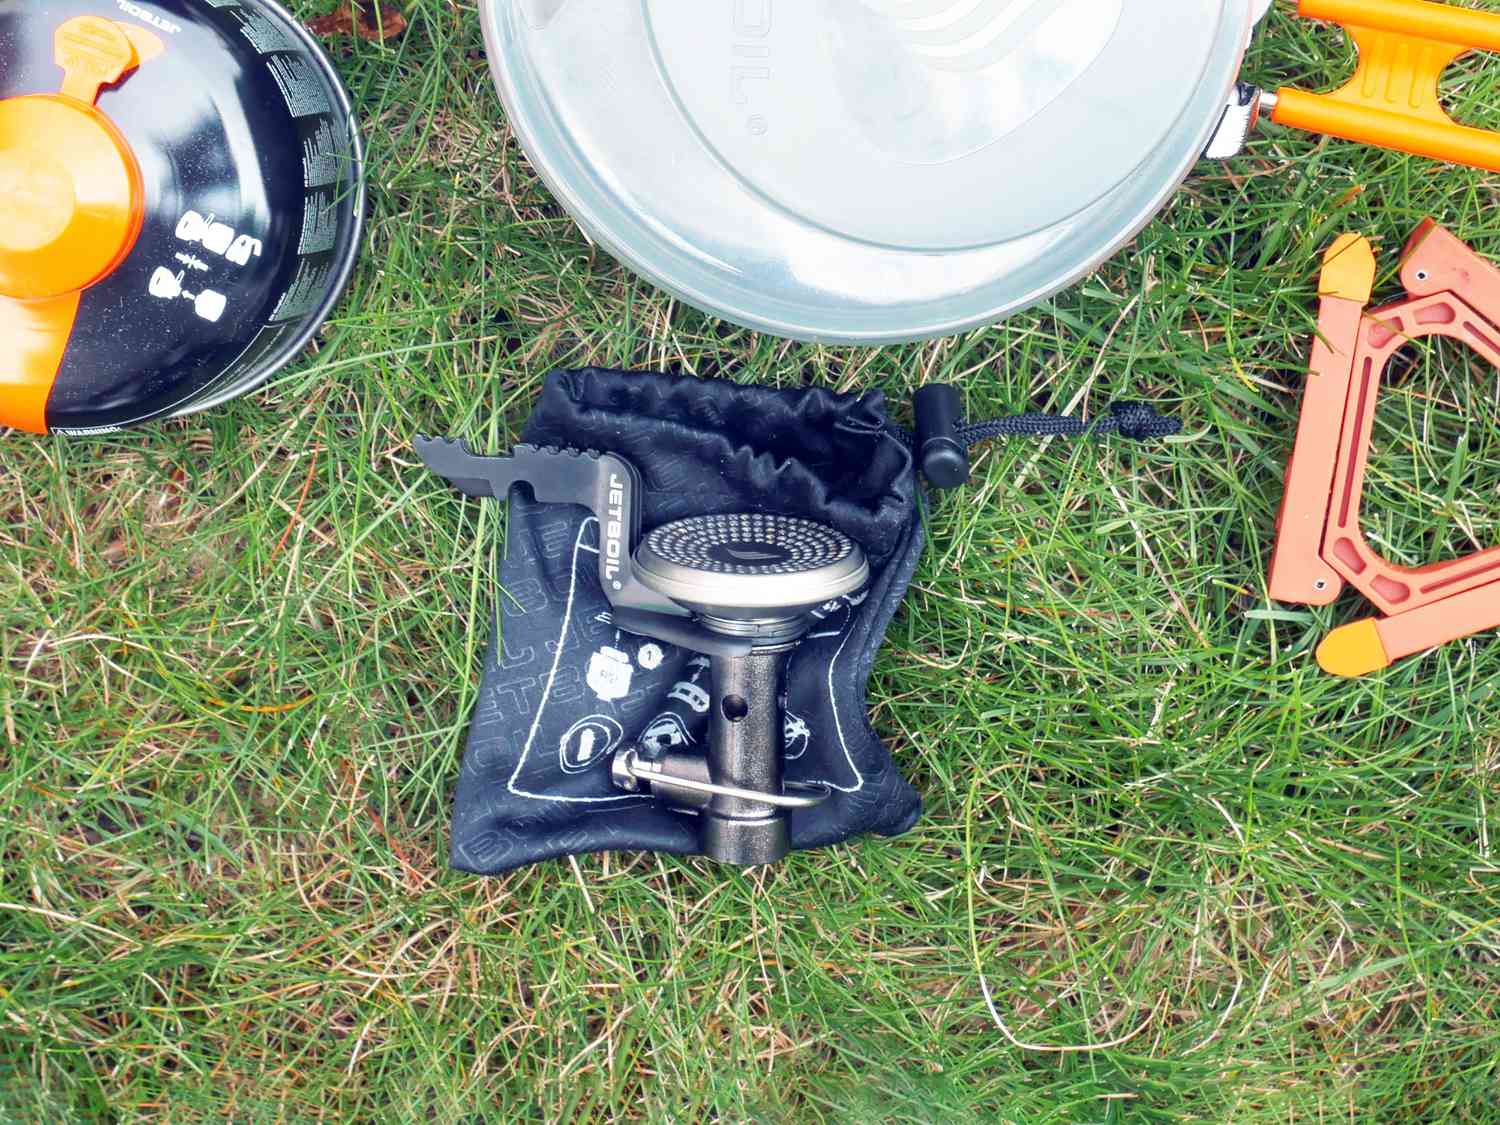 fuel, camping pot, camping stove and stand on grass